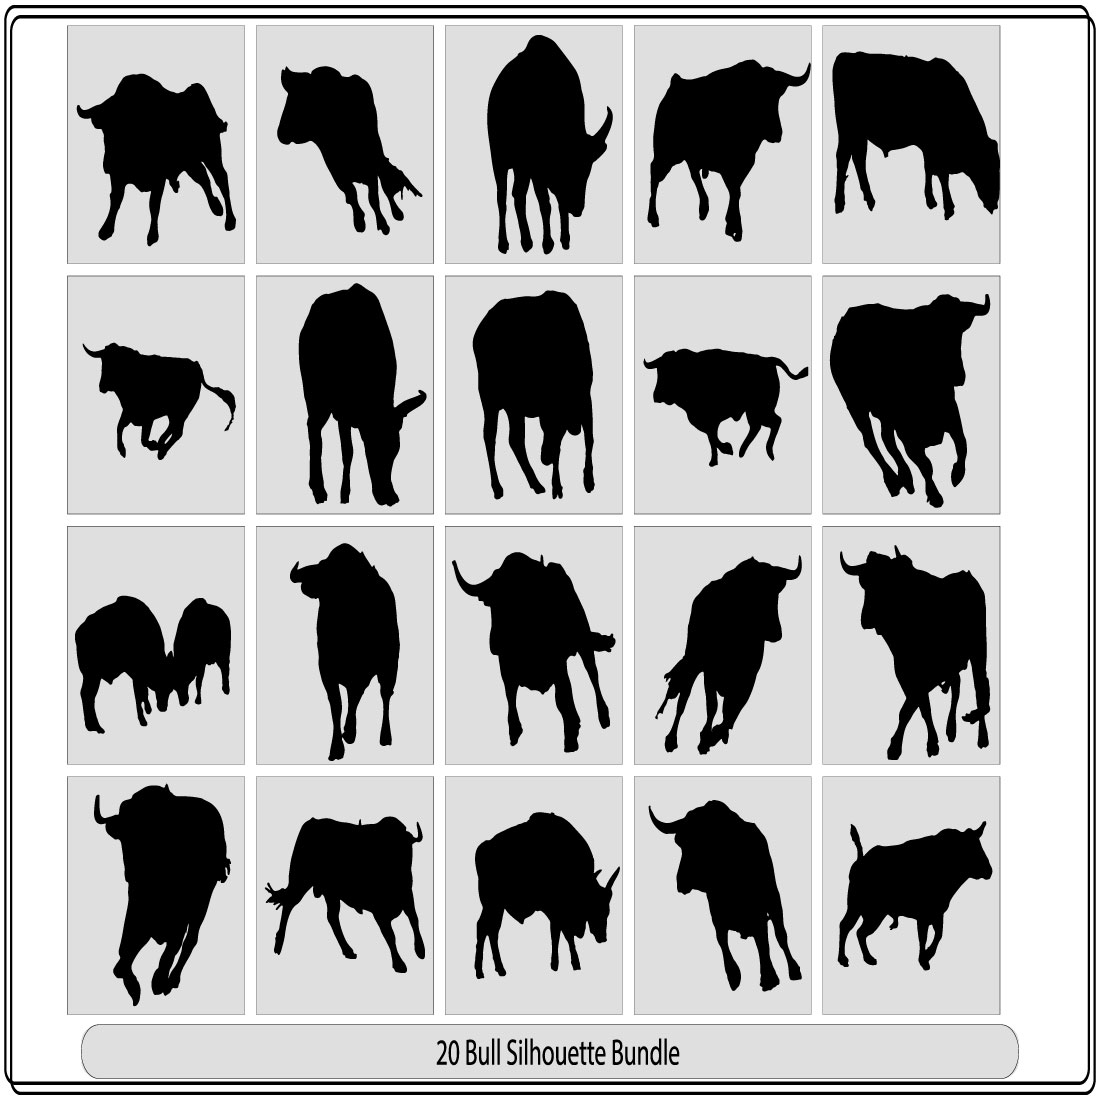 silhouettes of bulls in different positions,Bull logo designs set,Bull set,Stand bull,bull silhouette icon, preview image.